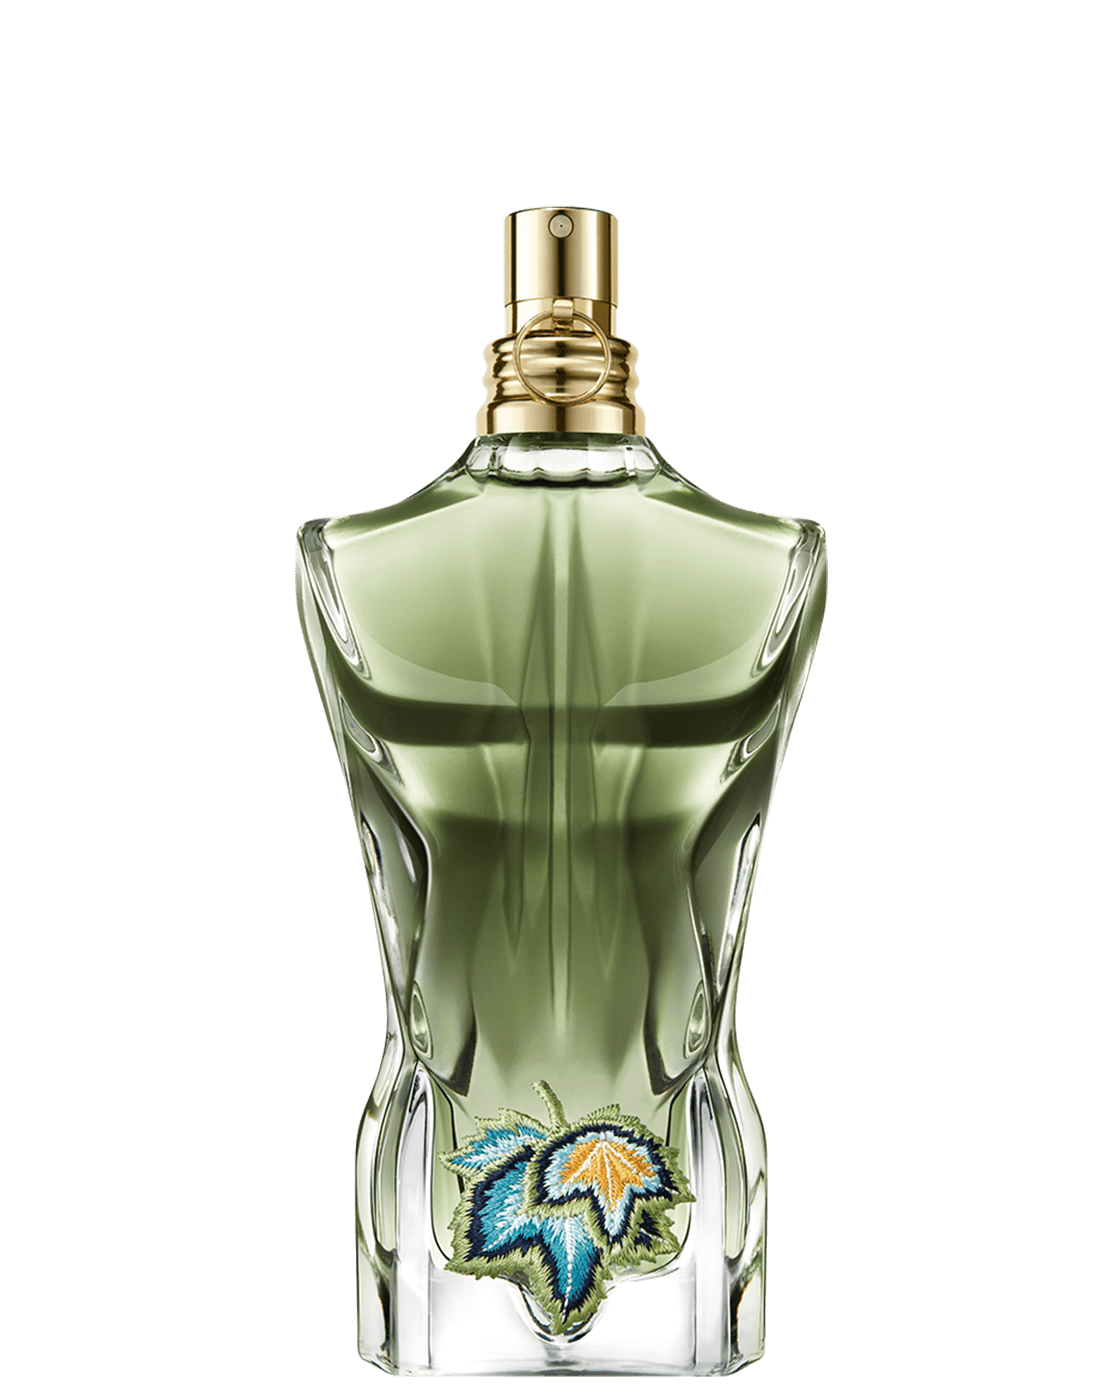 Rare Jean Paul Gaultier collection up for grabs! - The Perfume Society